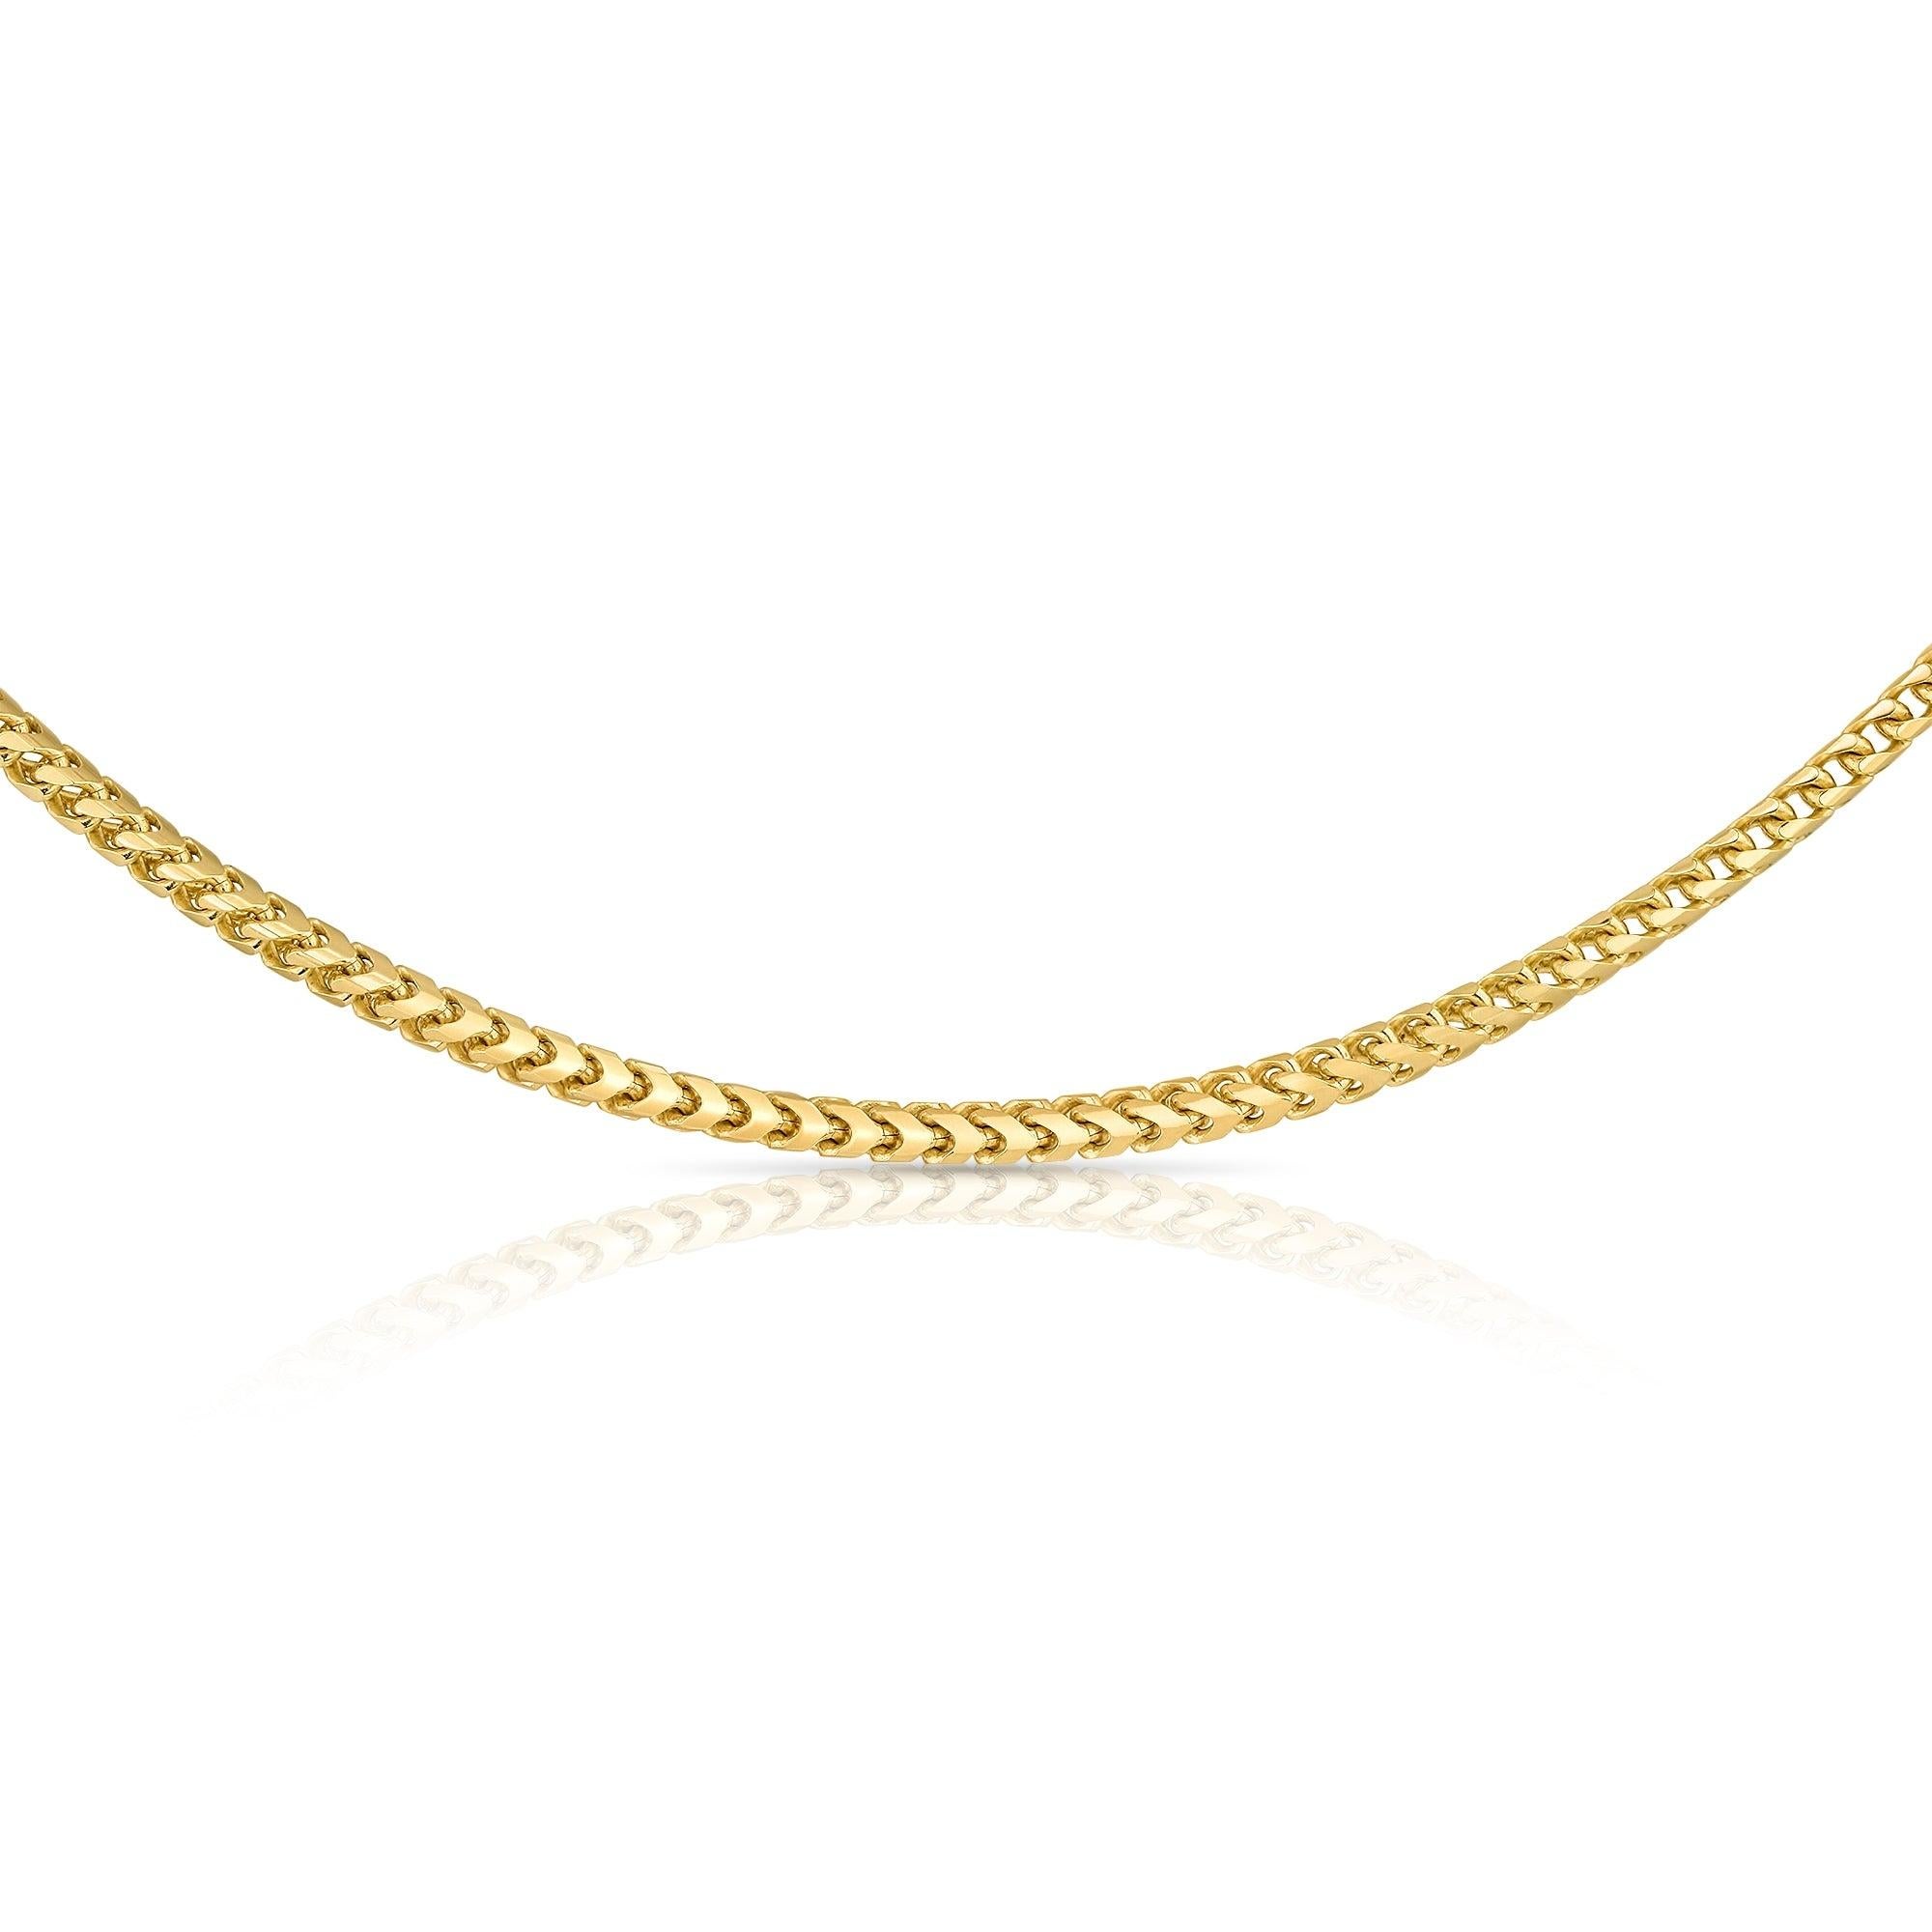 Men's Classic Solid 14K Yellow Gold Chain Necklace for Him by Shlomit Rogel

An elegant necklace with presence! 
Simple yet timeless, this necklace is part of Rogel's Men's collection, it is crafted from 14k solid yellow gold. Perfect for everyday